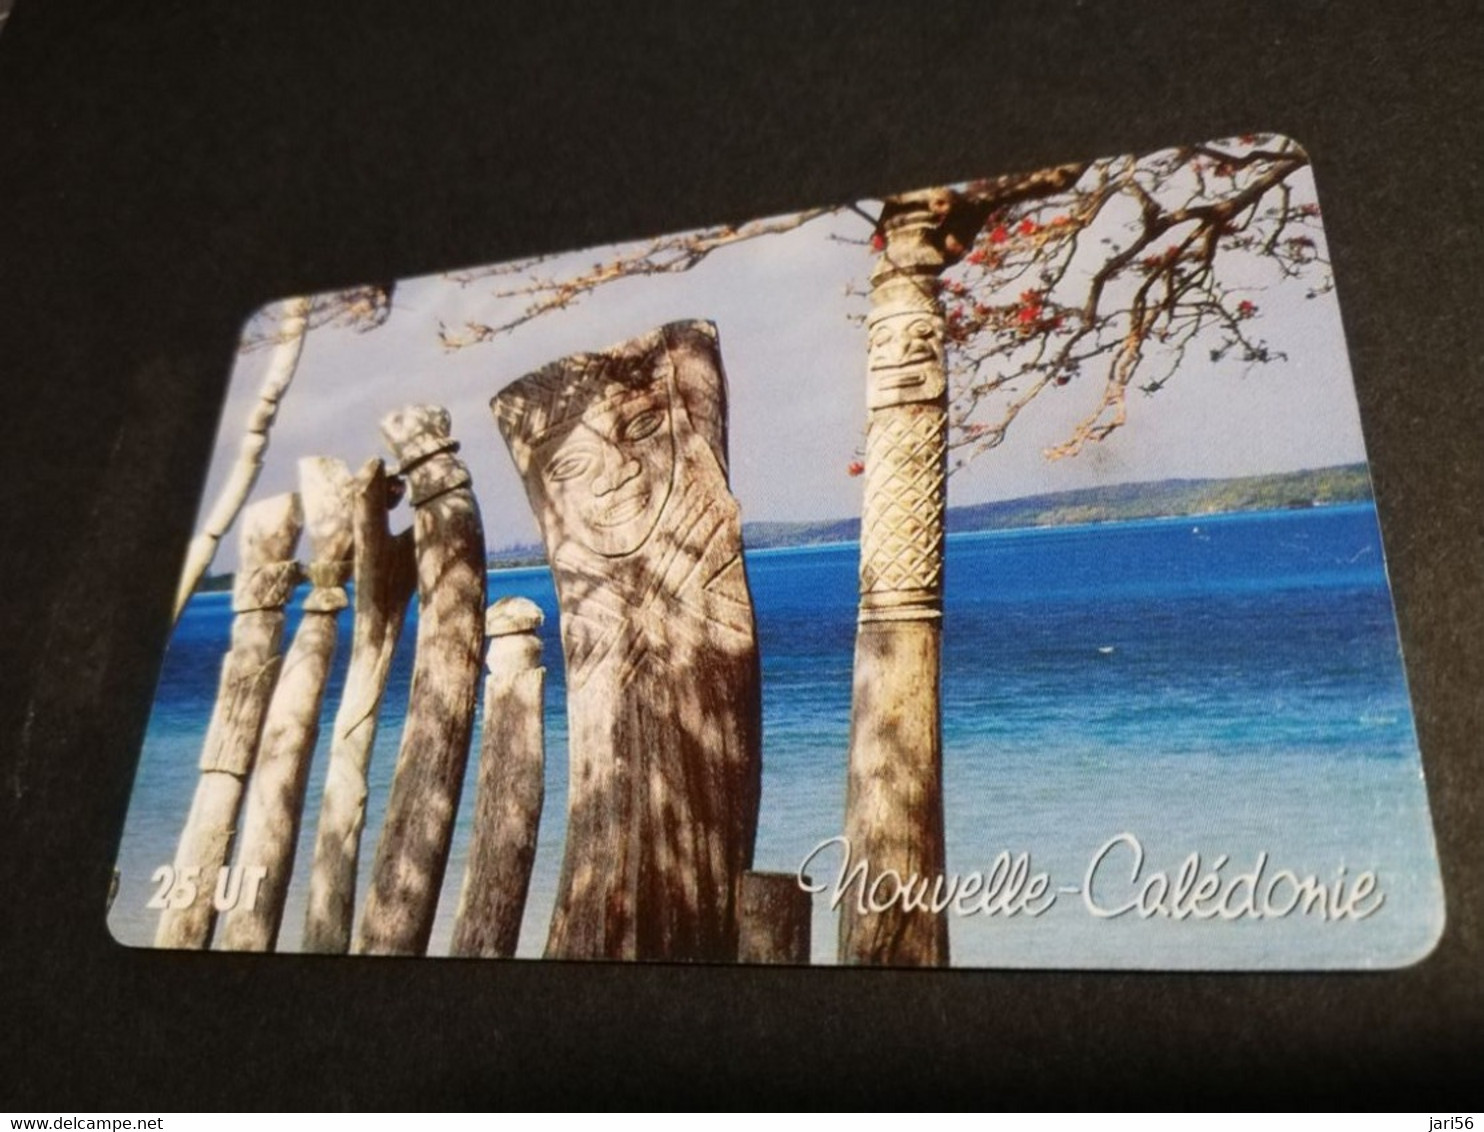 NOUVELLE CALEDONIA  CHIP CARD 25  UNITS  CARVED TREES AT BEACH         ** 4193 ** - New Caledonia